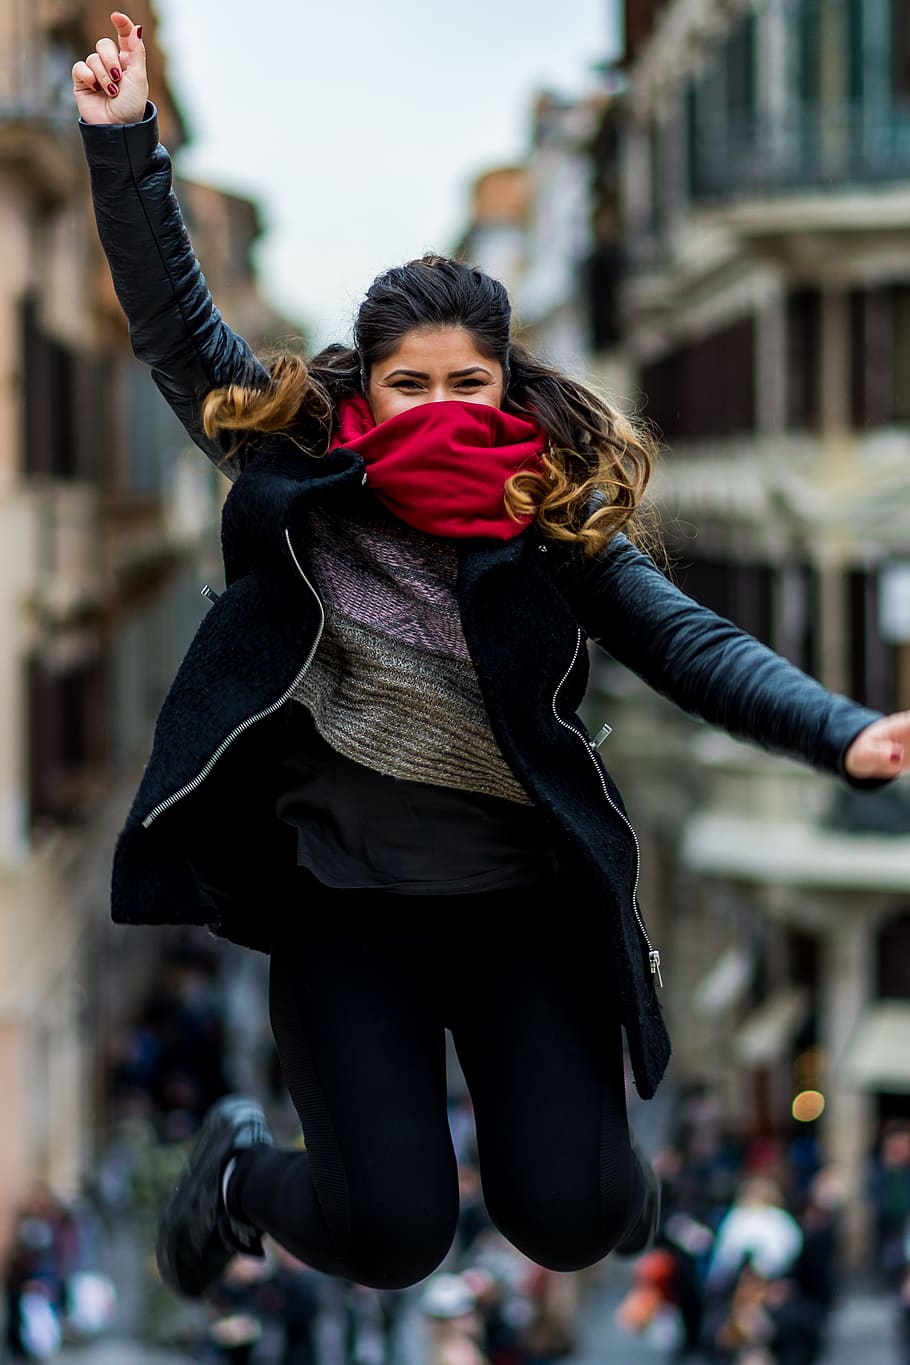 italy, roma, piazza di spagna, share, people, love, girl, photography